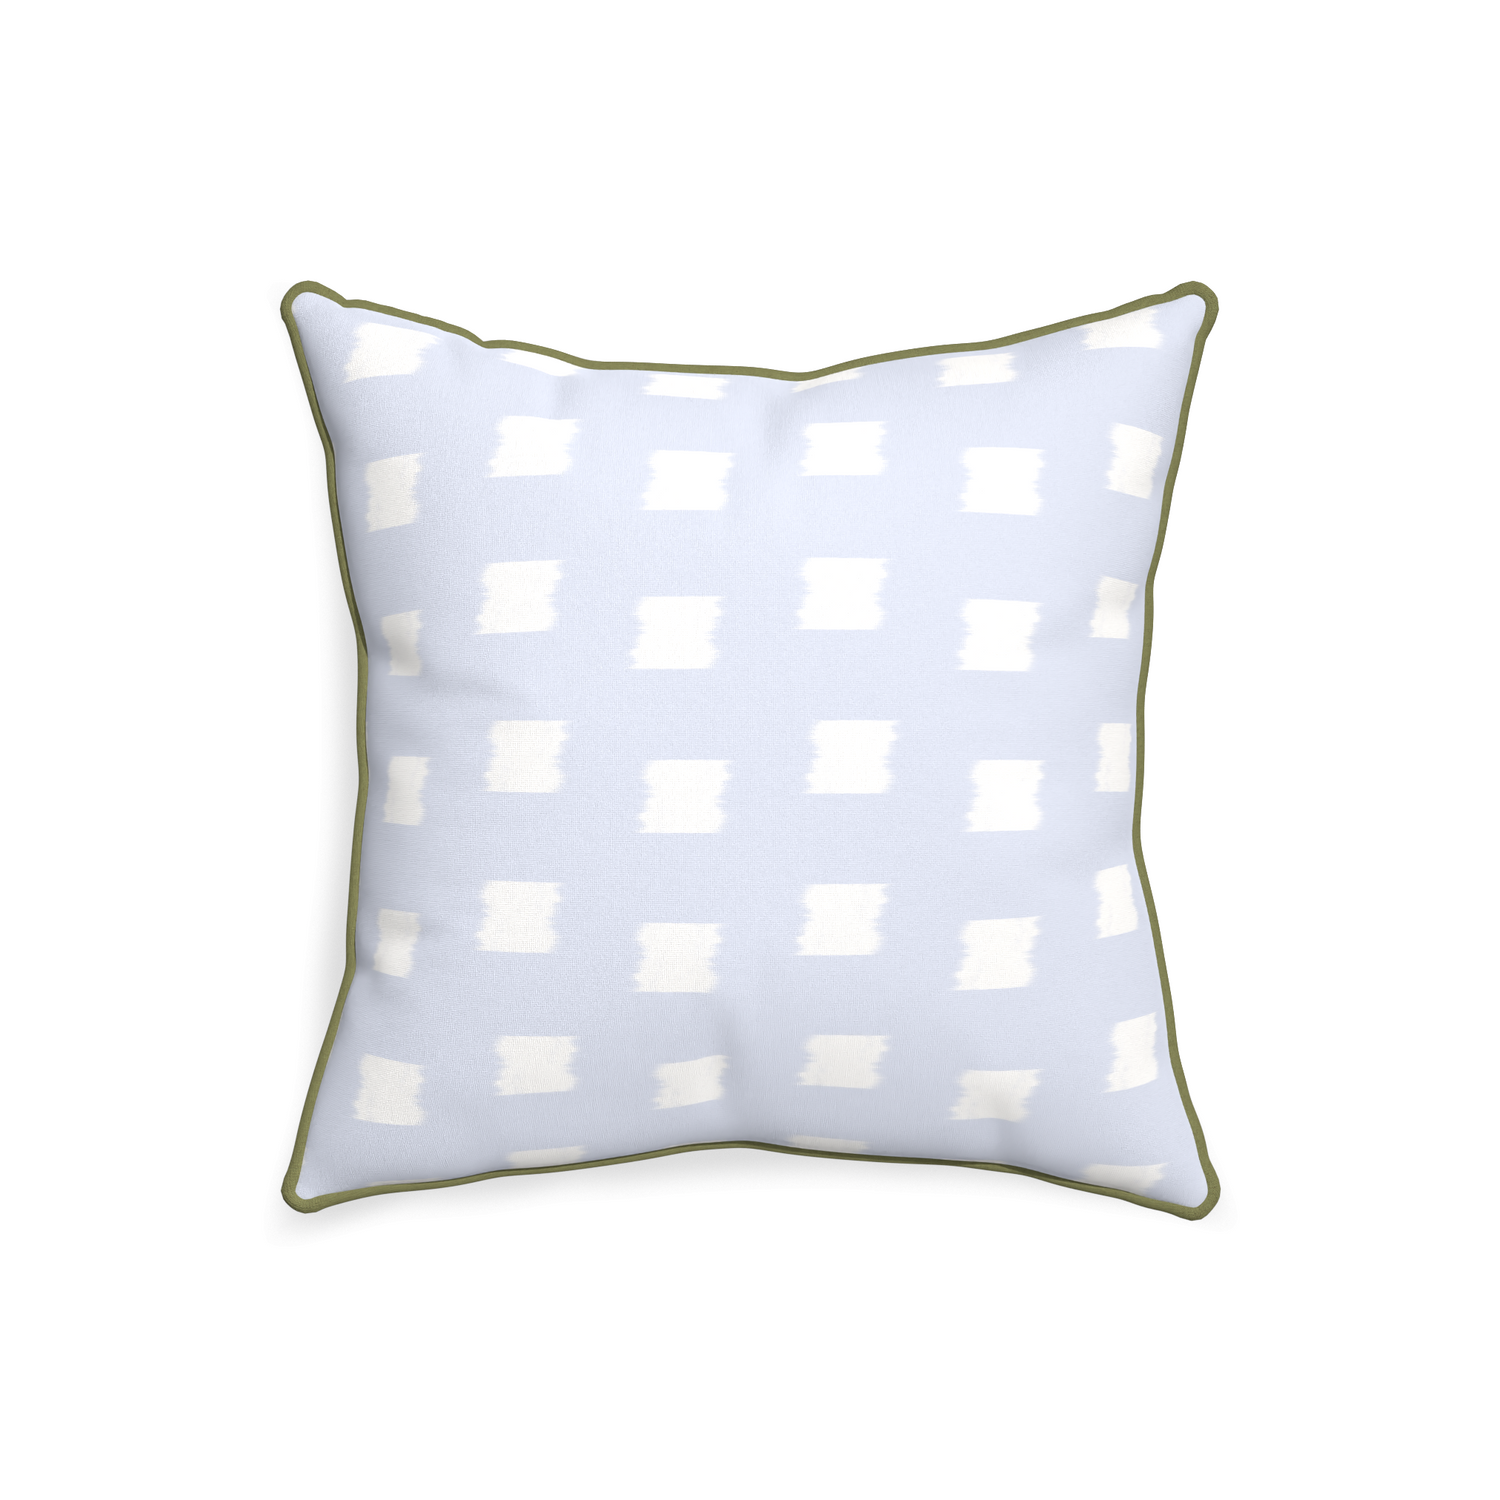 20-square denton custom pillow with moss piping on white background